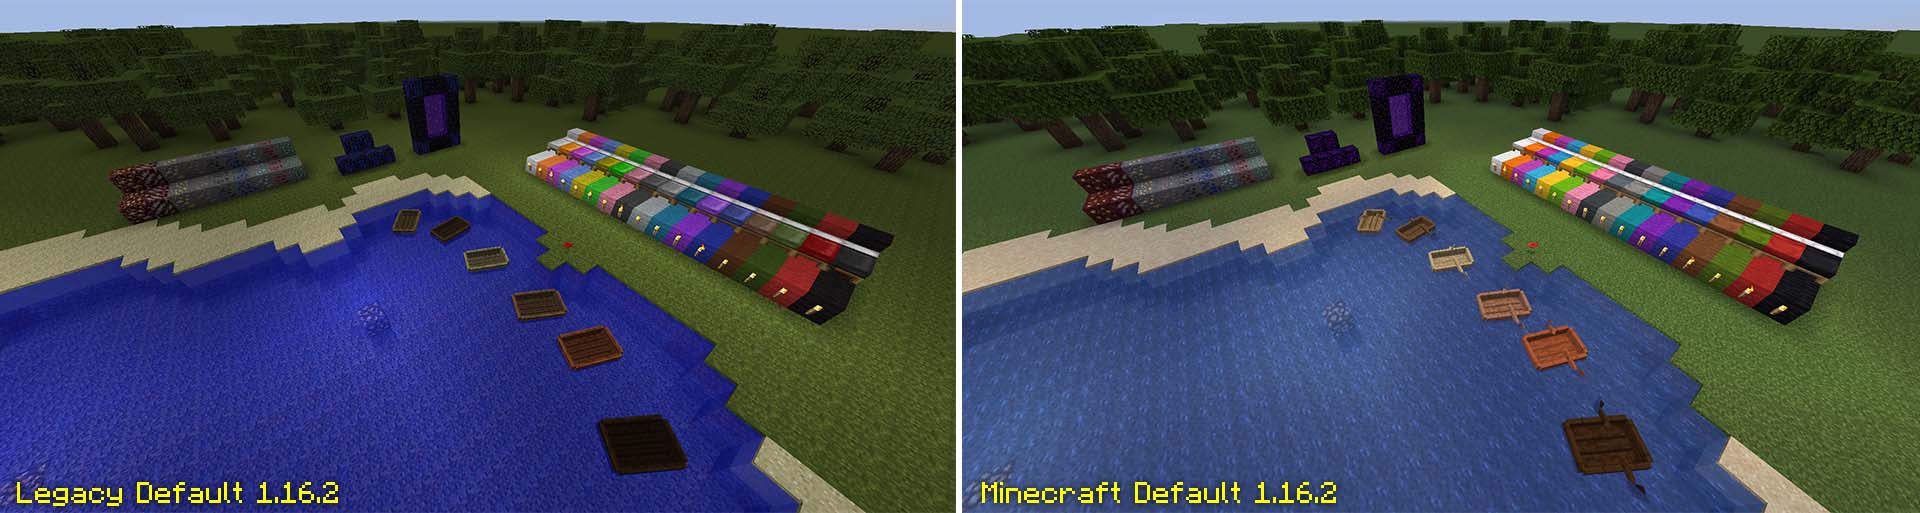 what size is minecrafts default resource pack in 1.12